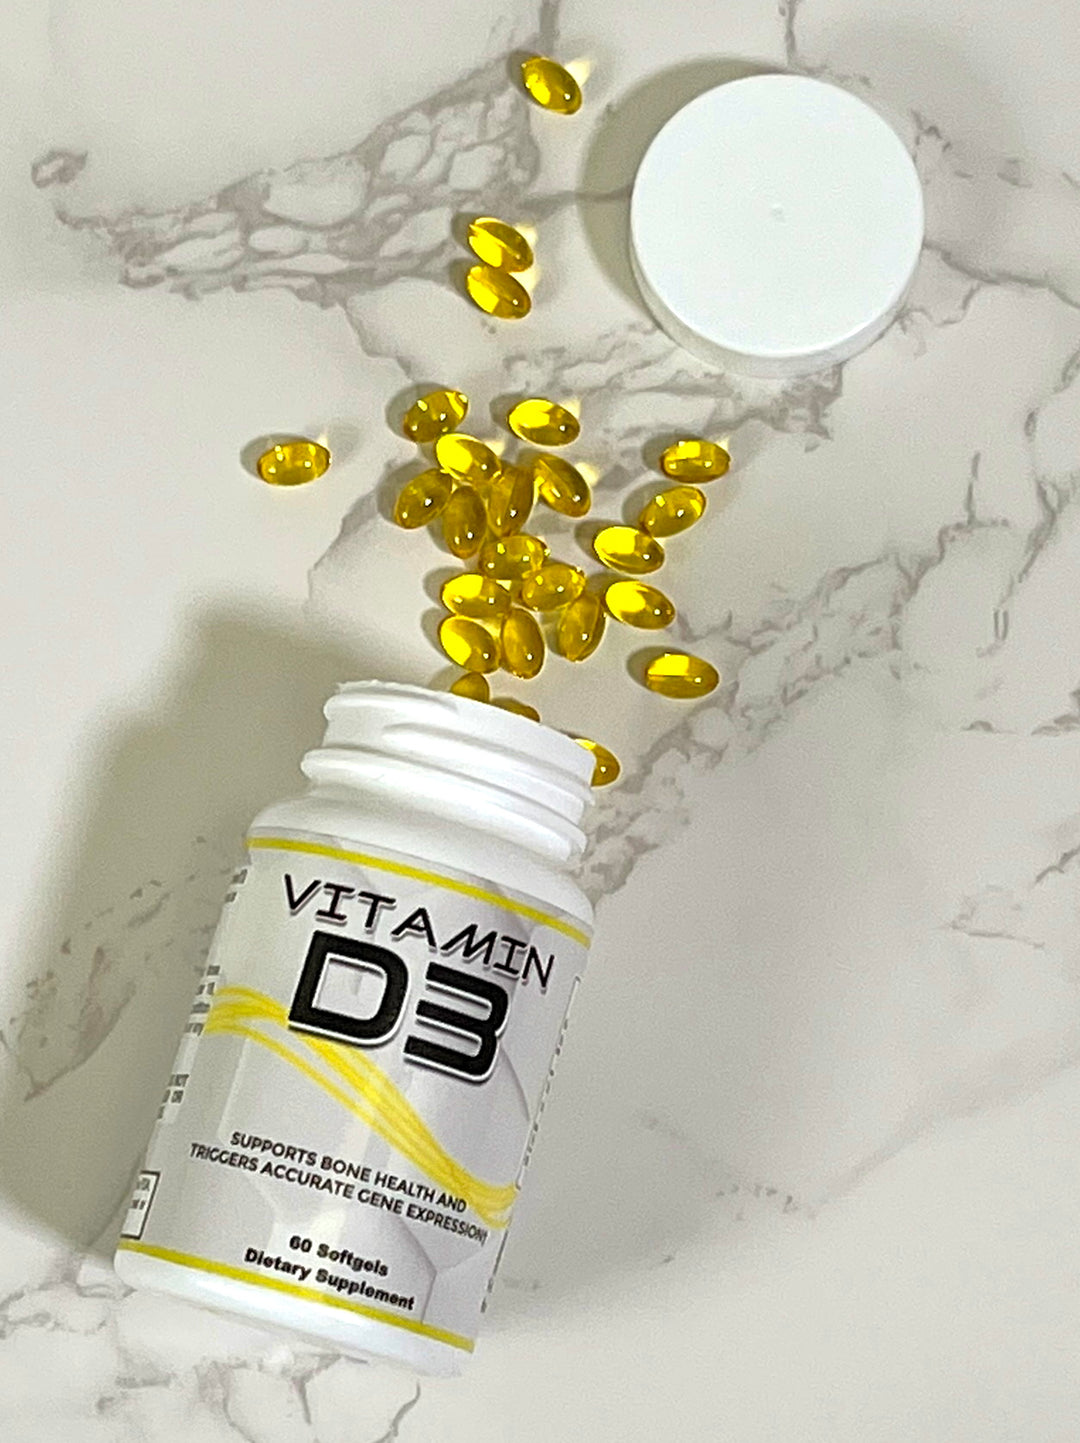 Boomer Products Vitamin D3 helsp support immune health, bone health and trigger accurate gene expression